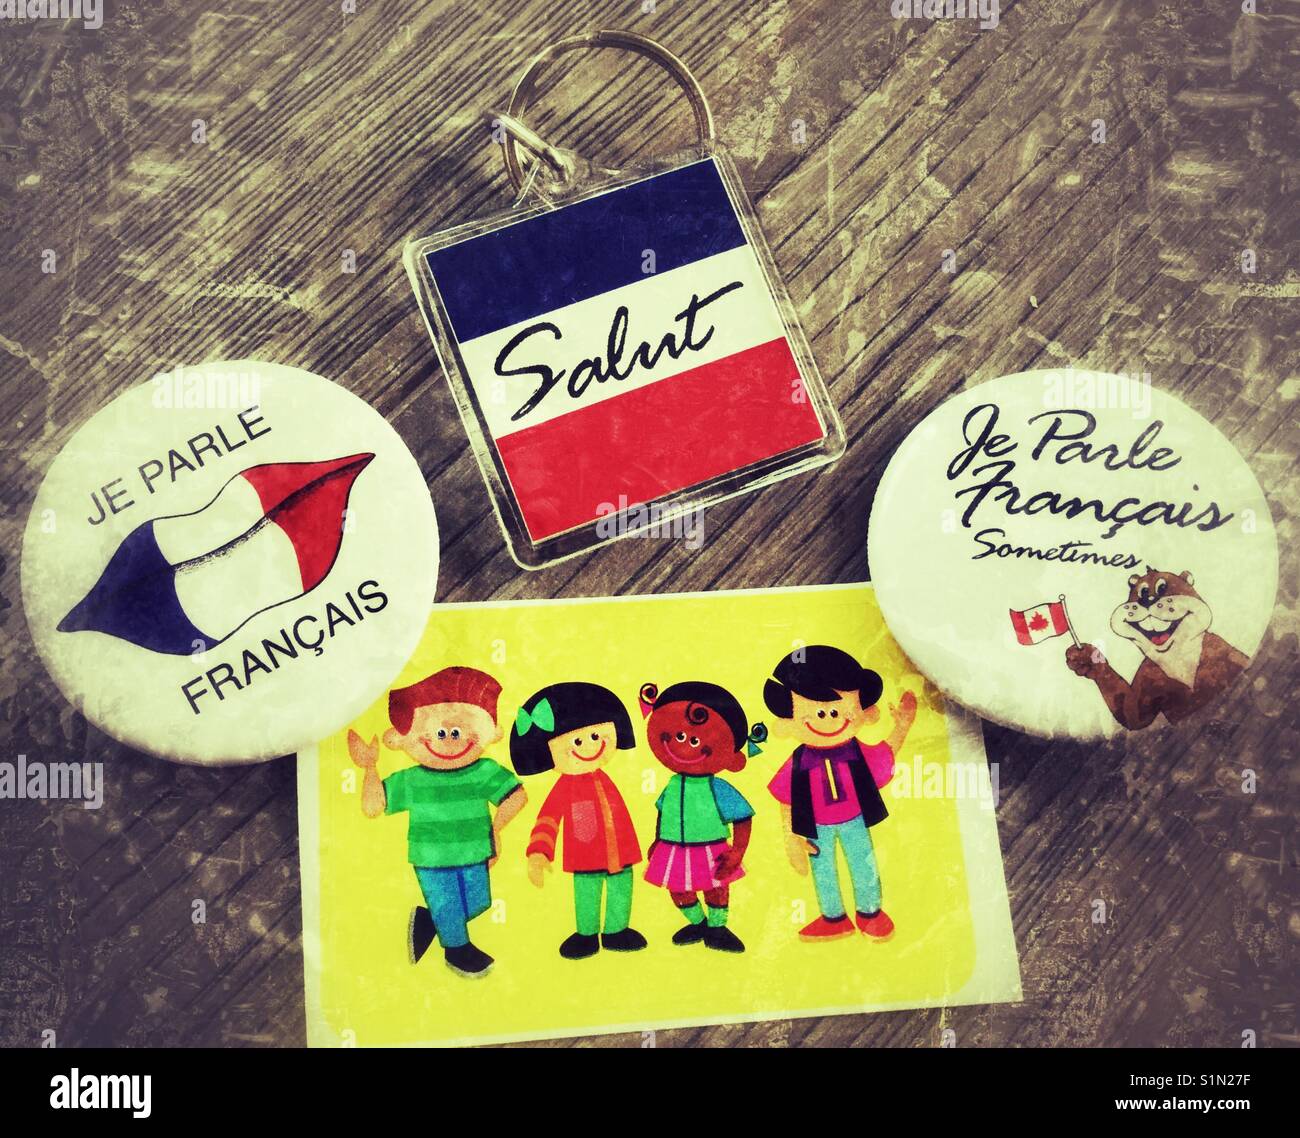 Promoting the French language. Stock Photo